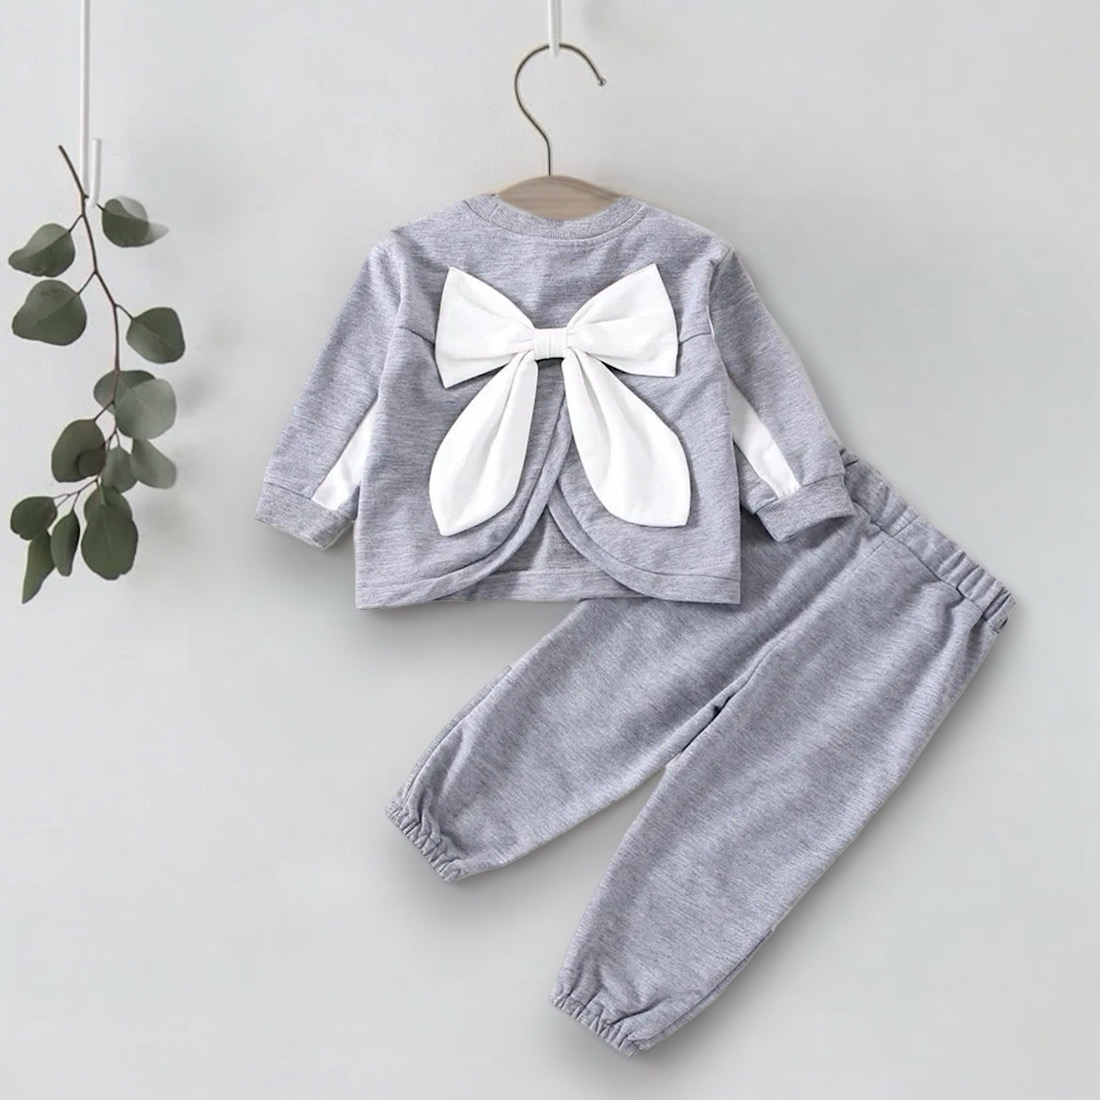 Baby Toddler Girls Casual Outfit Gray And White Big Bow Long Sleeve Top And Jogger Pants 2pc Set